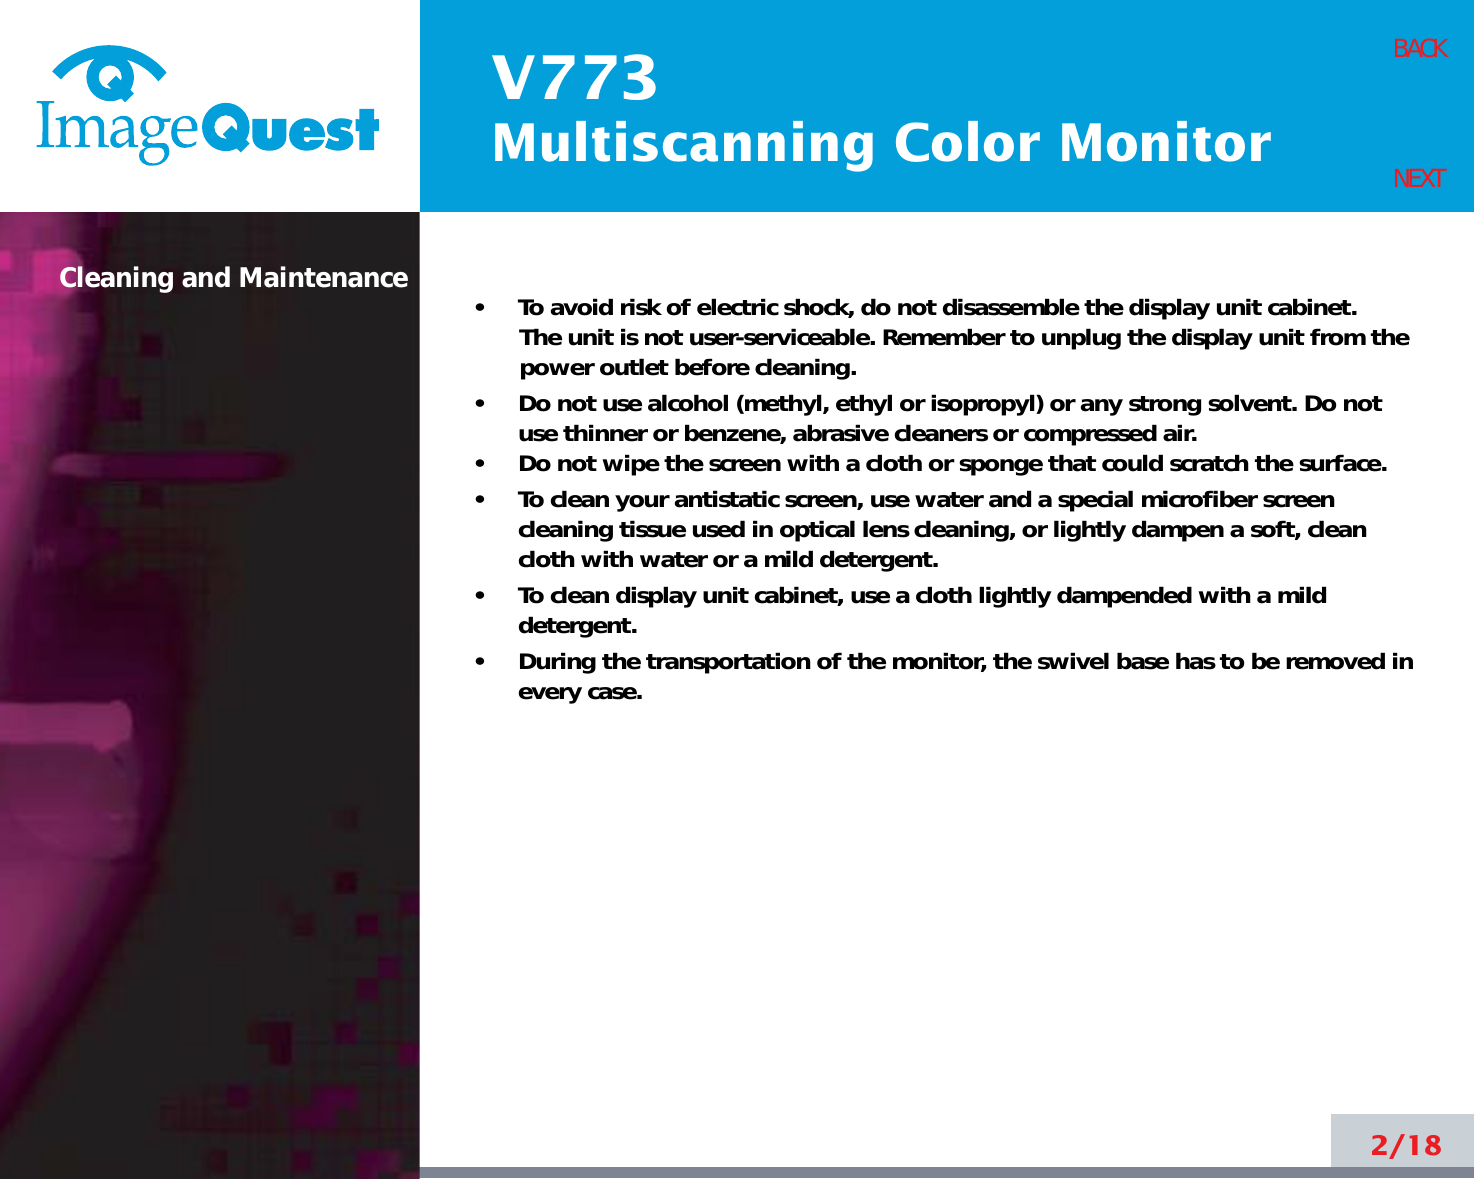 V773Multiscanning Color Monitor2/18BACKNEXT•     To avoid risk of electric shock, do not disassemble the display unit cabinet. The unit is not user-serviceable. Remember to unplug the display unit from thepower outlet before cleaning.•     Do not use alcohol (methyl, ethyl or isopropyl) or any strong solvent. Do notuse thinner or benzene, abrasive cleaners or compressed air.•     Do not wipe the screen with a cloth or sponge that could scratch the surface.•     To clean your antistatic screen, use water and a special microfiber screencleaning tissue used in optical lens cleaning, or lightly dampen a soft, cleancloth with water or a mild detergent.•     To clean display unit cabinet, use a cloth lightly dampended with a milddetergent.•     During the transportation of the monitor, the swivel base has to be removed inevery case.Cleaning and Maintenance